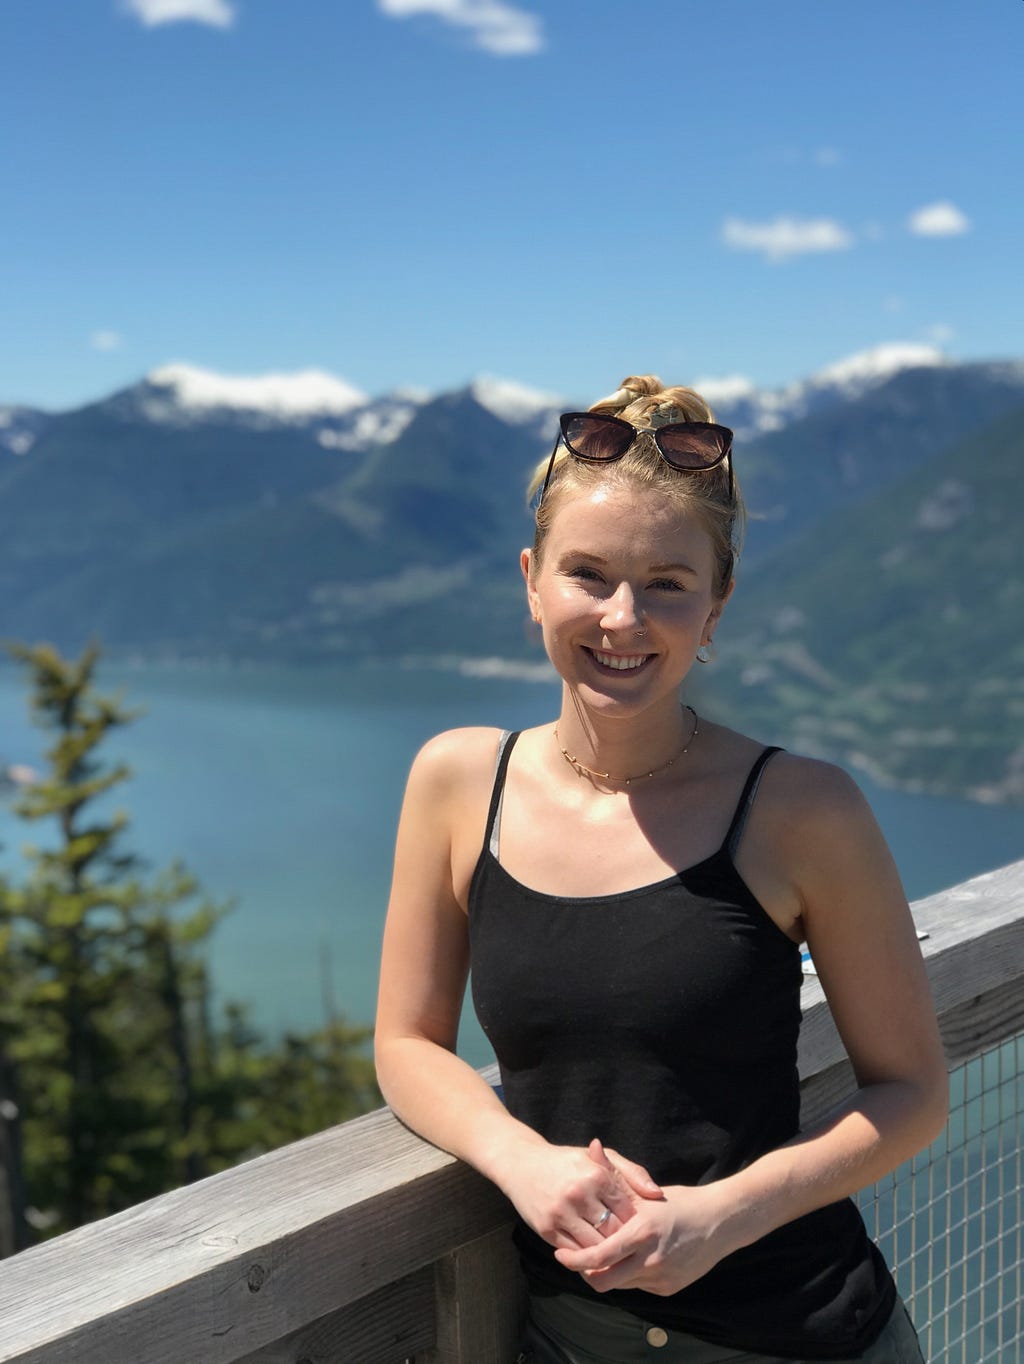 Hannah Hennig smiles as she leans against a railing with a lake and mountains in the background.